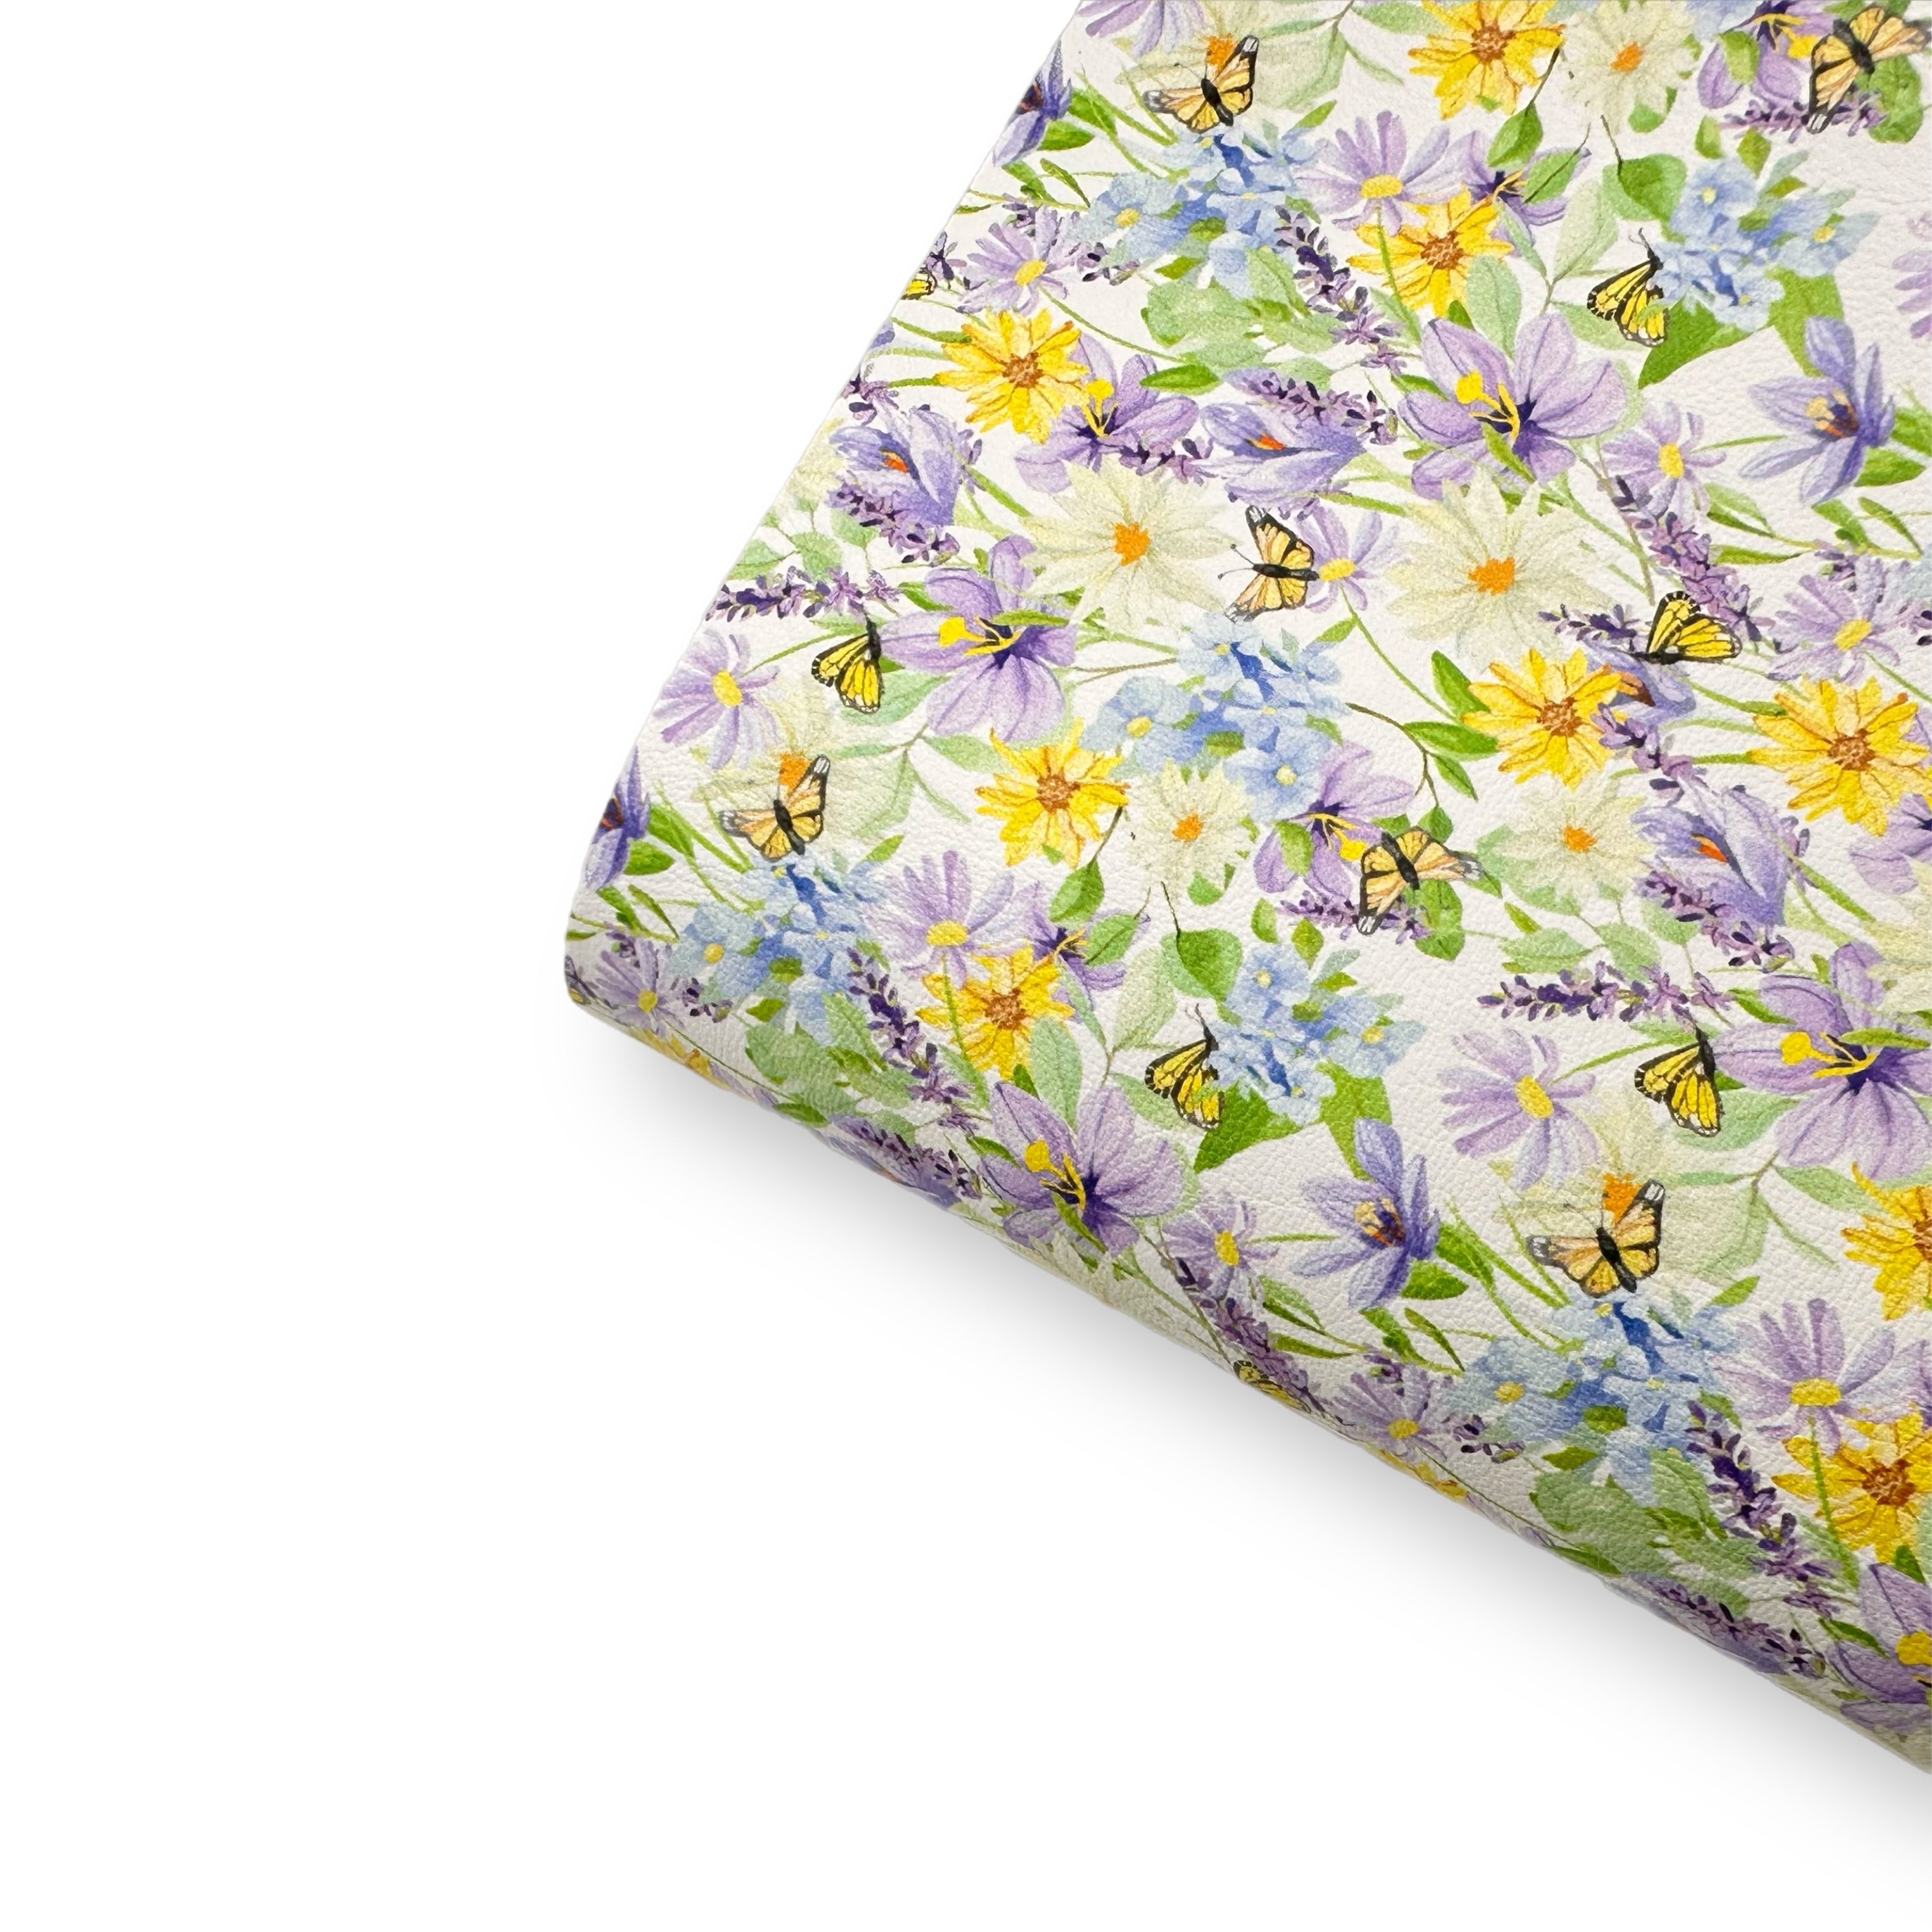 Butterfly Meadow Blooms Premium Faux Leather Fabric